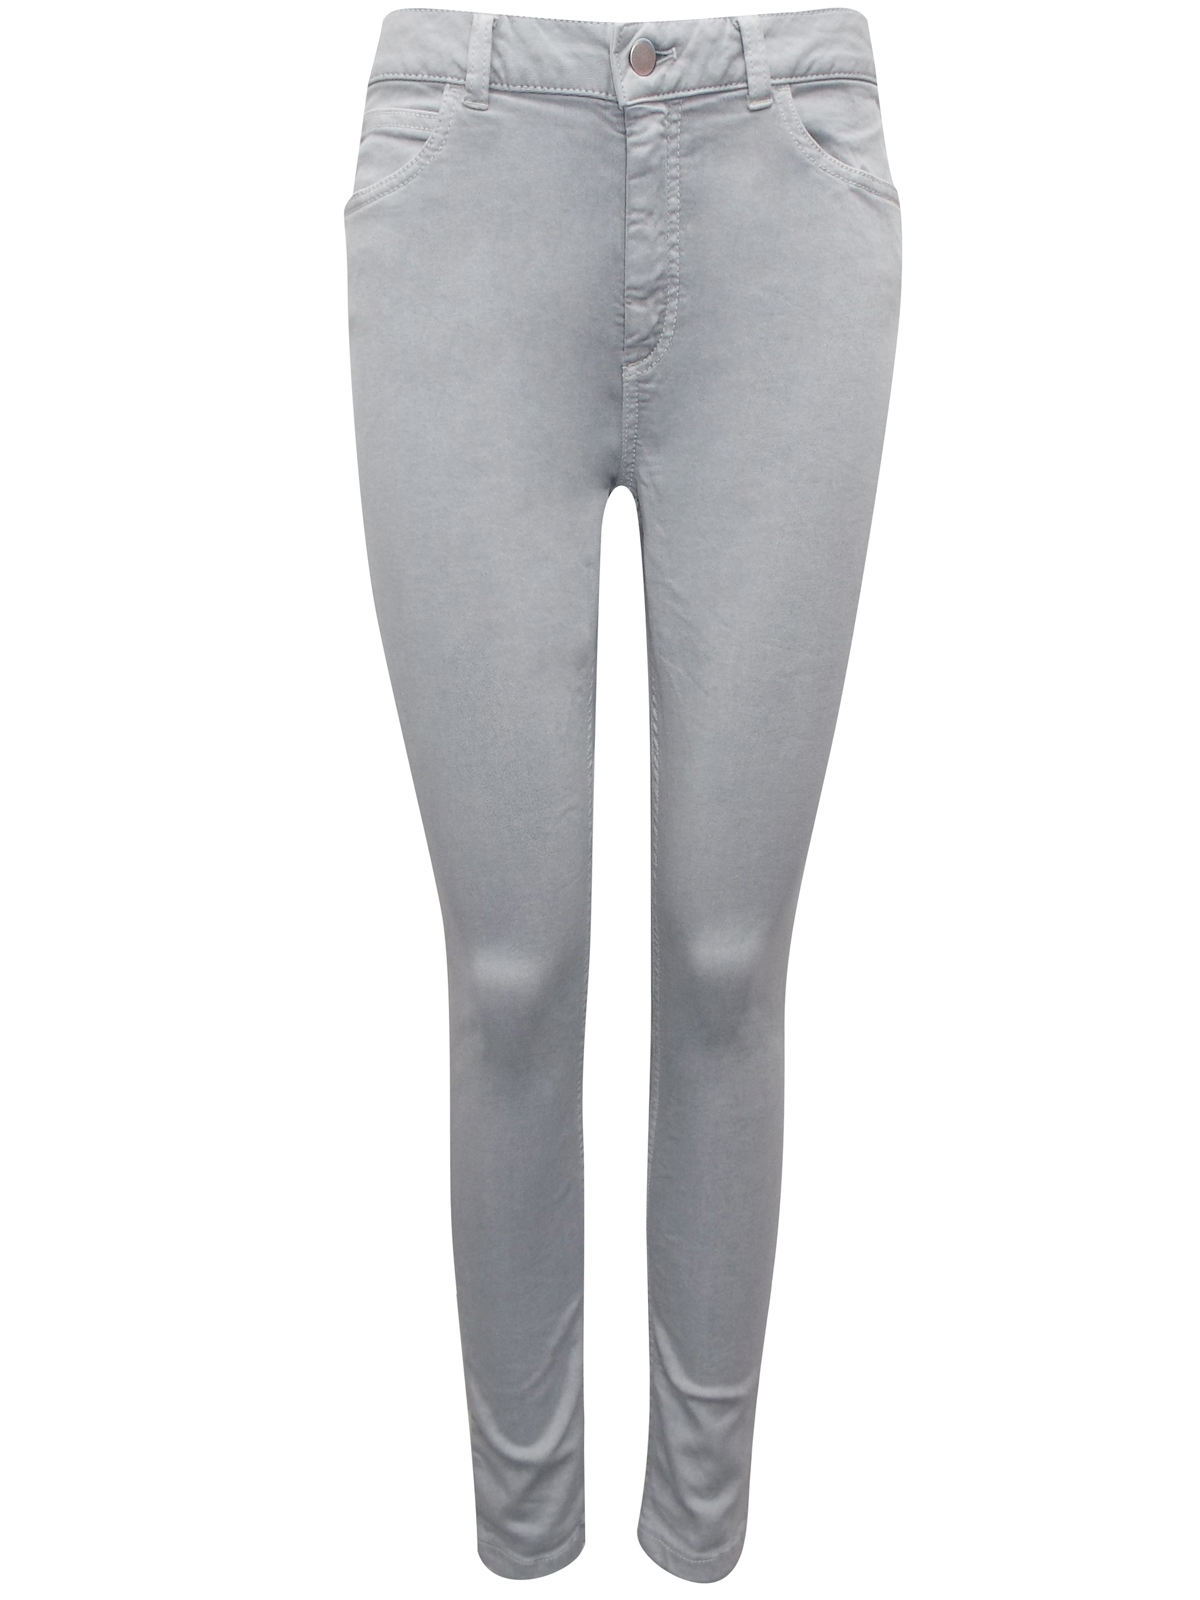 marks and spencer grey jeans